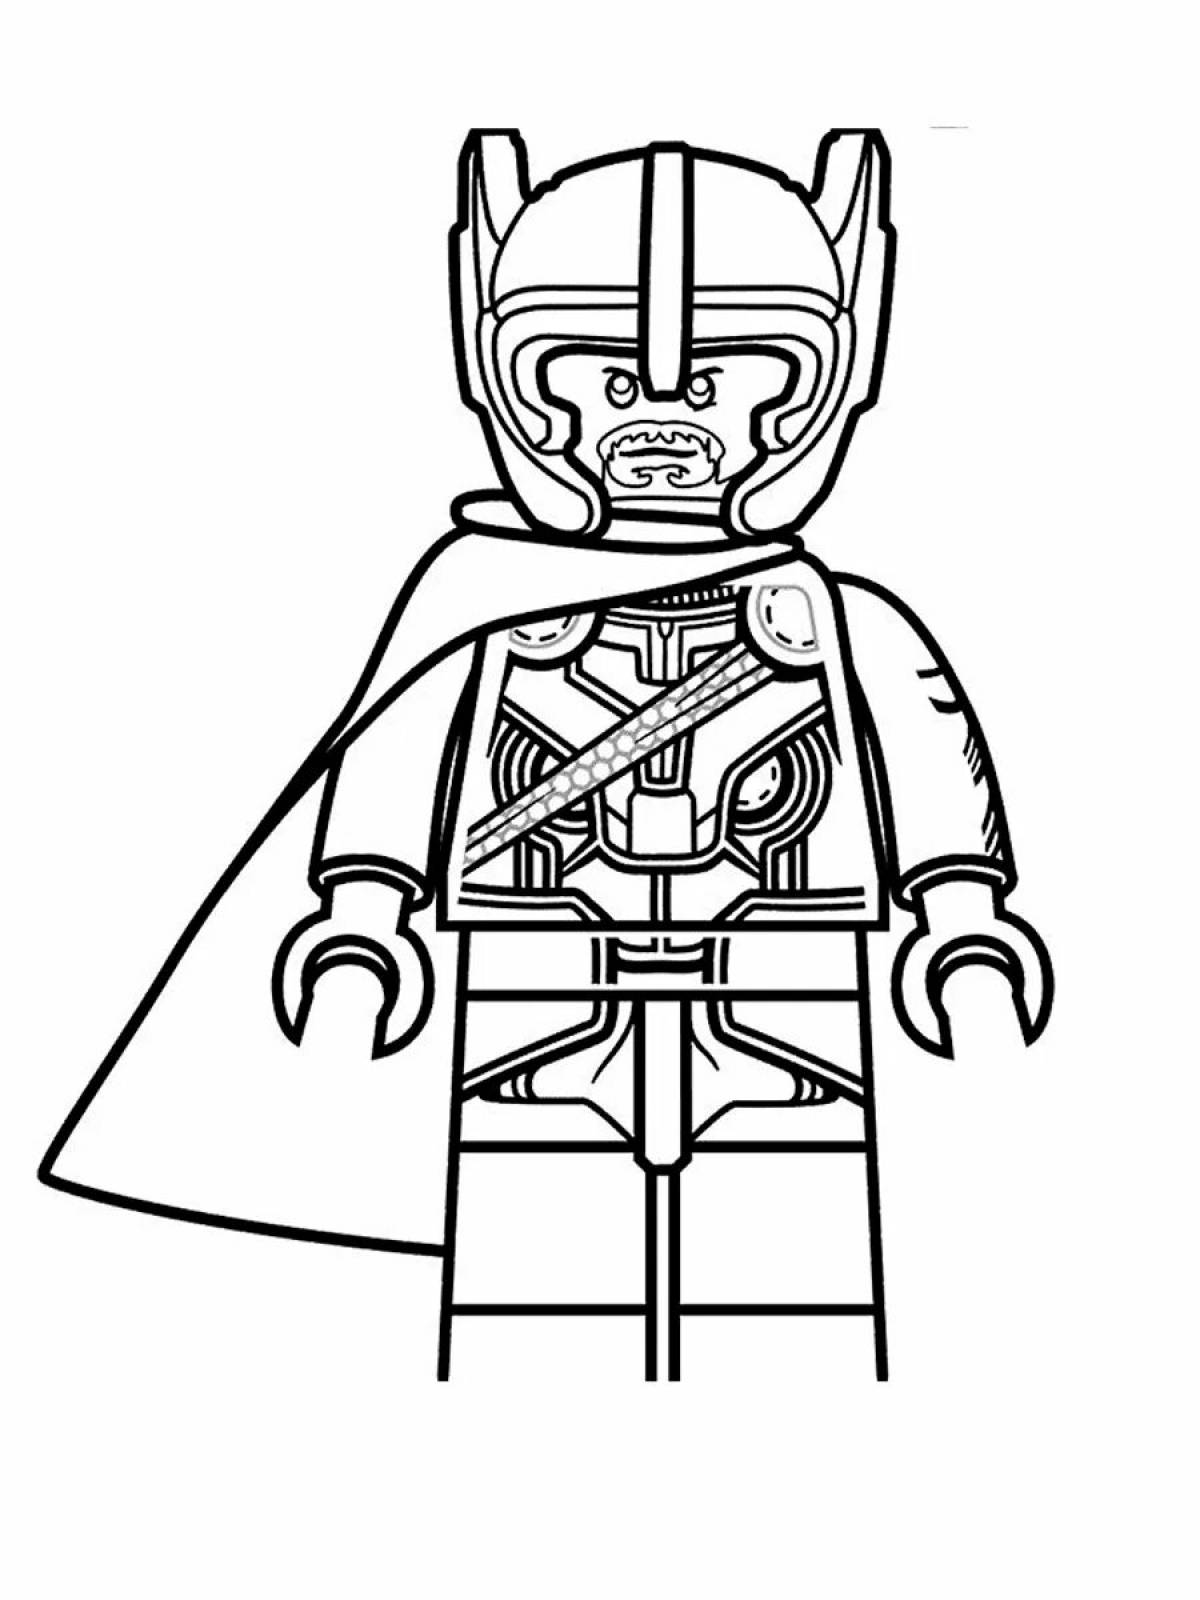 Lego heroes coloring book exploding with color